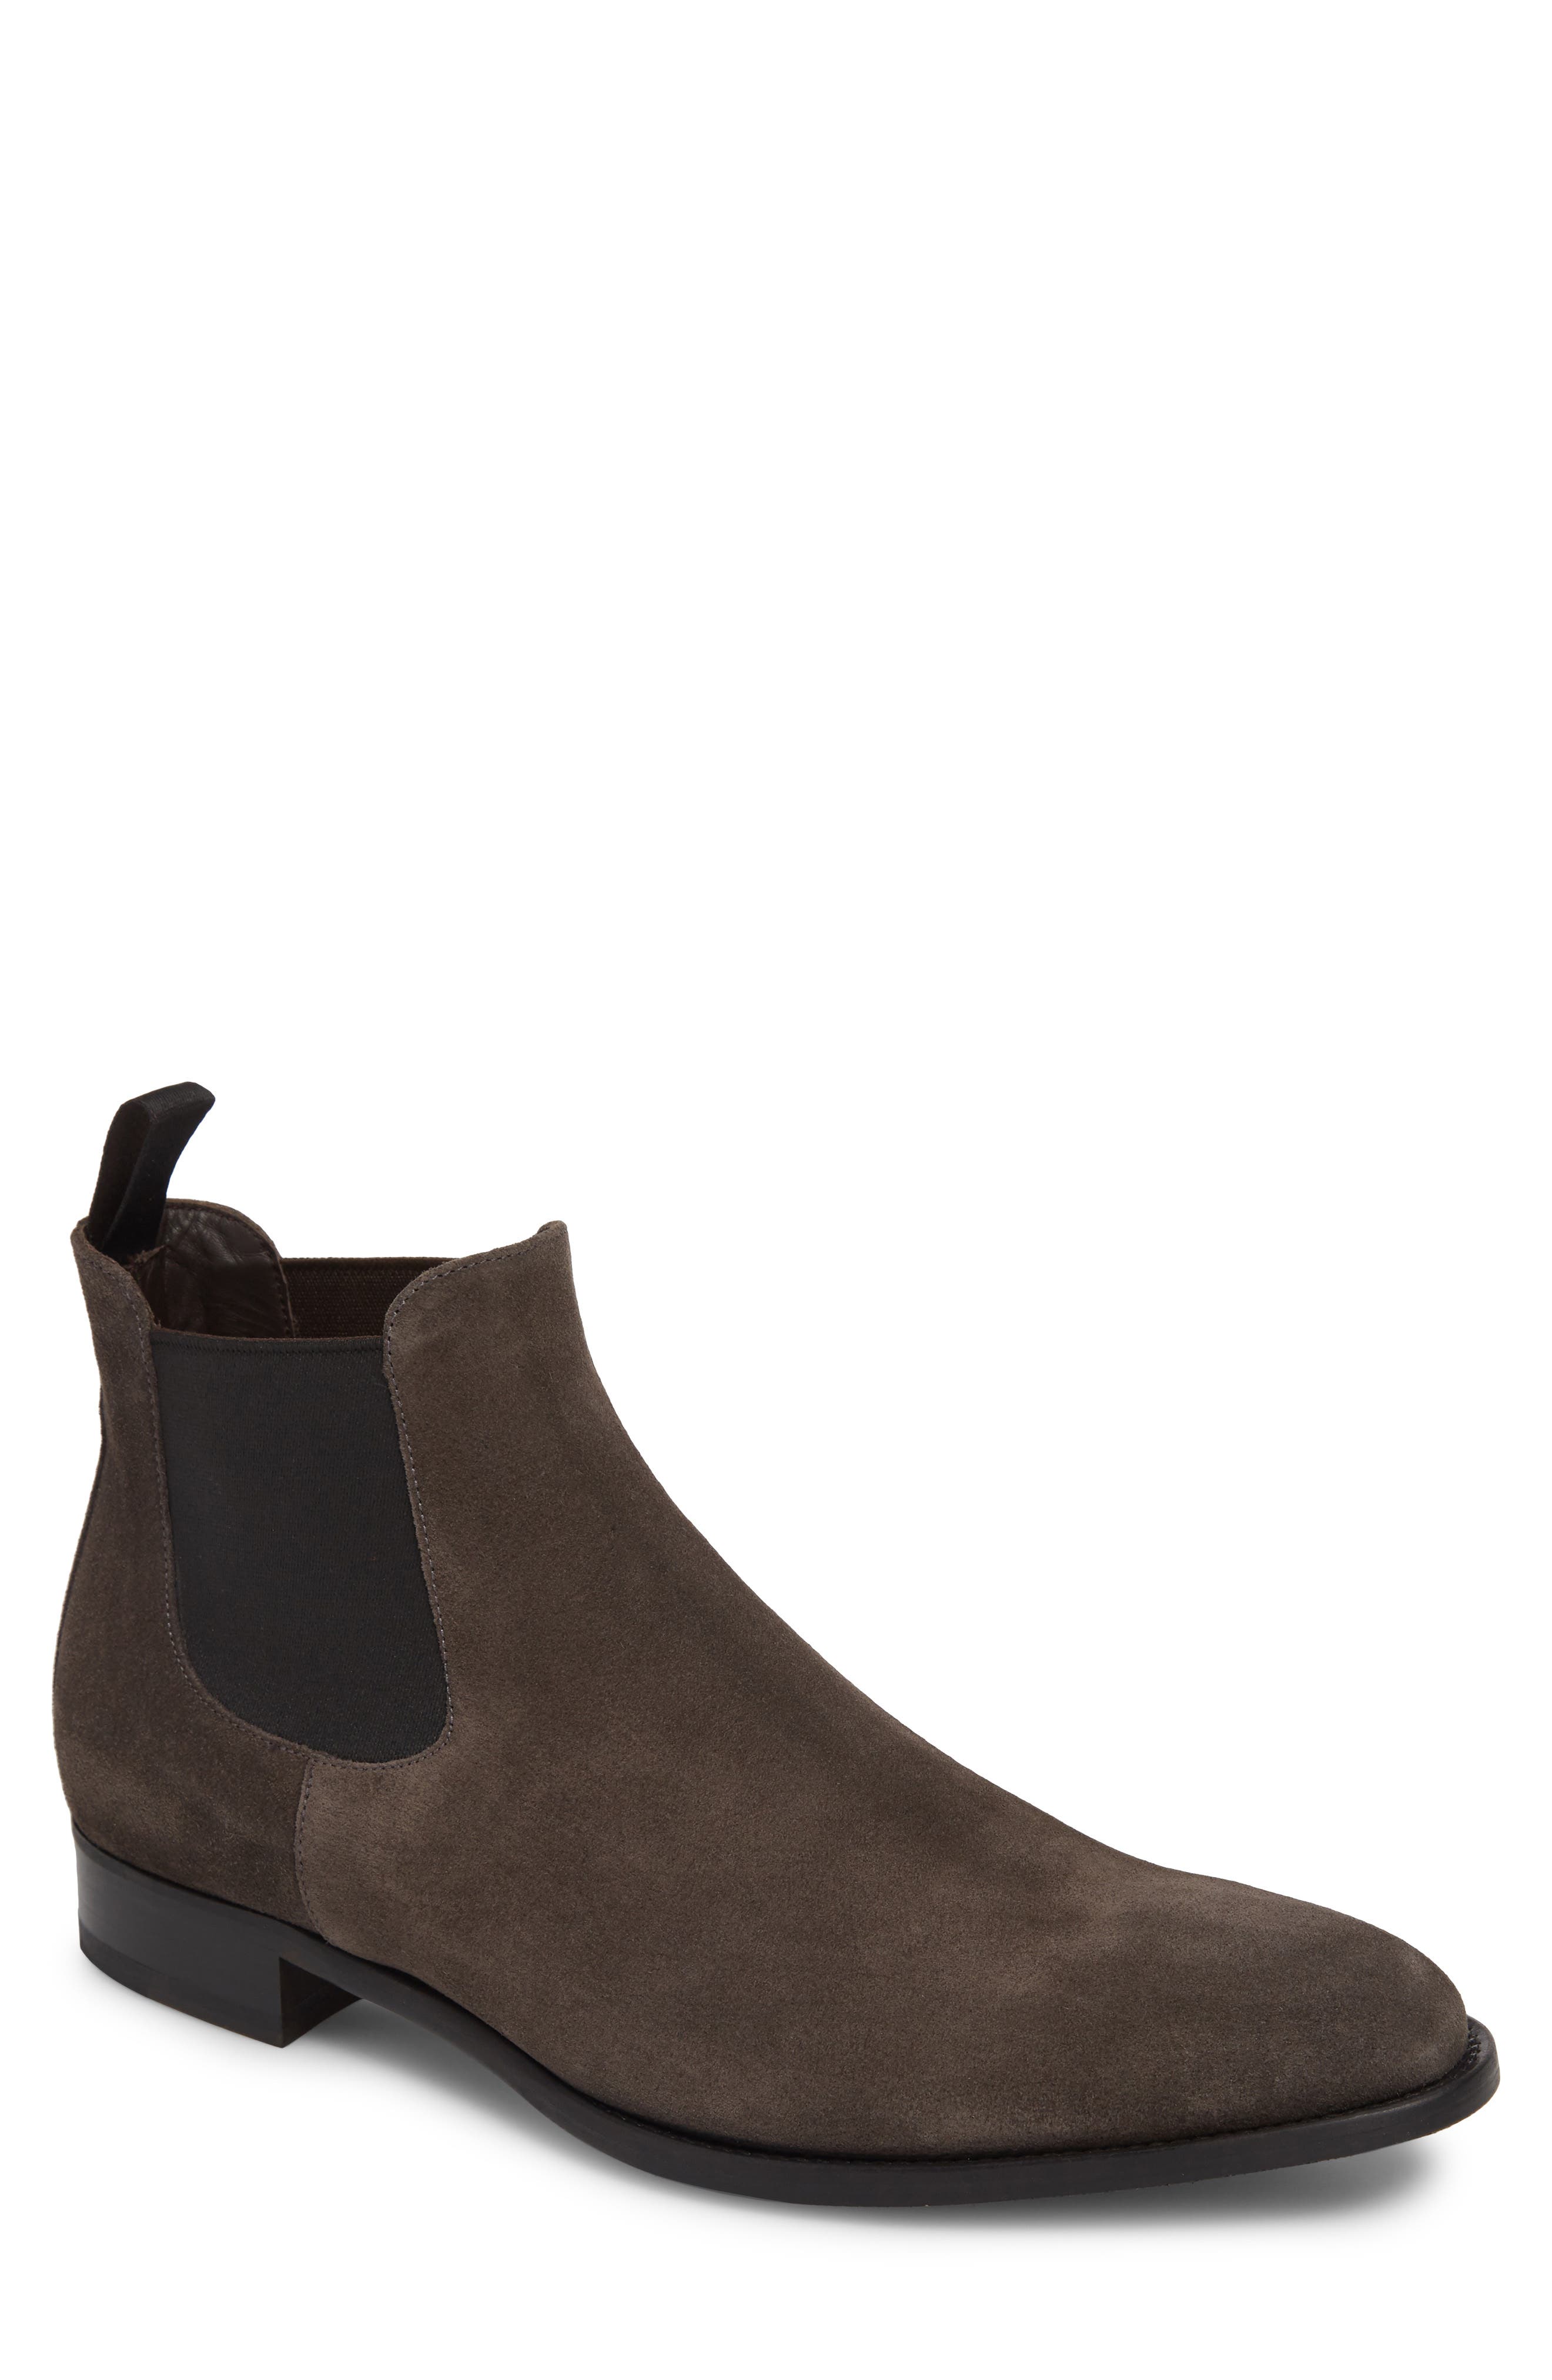 h and m mens chelsea boots